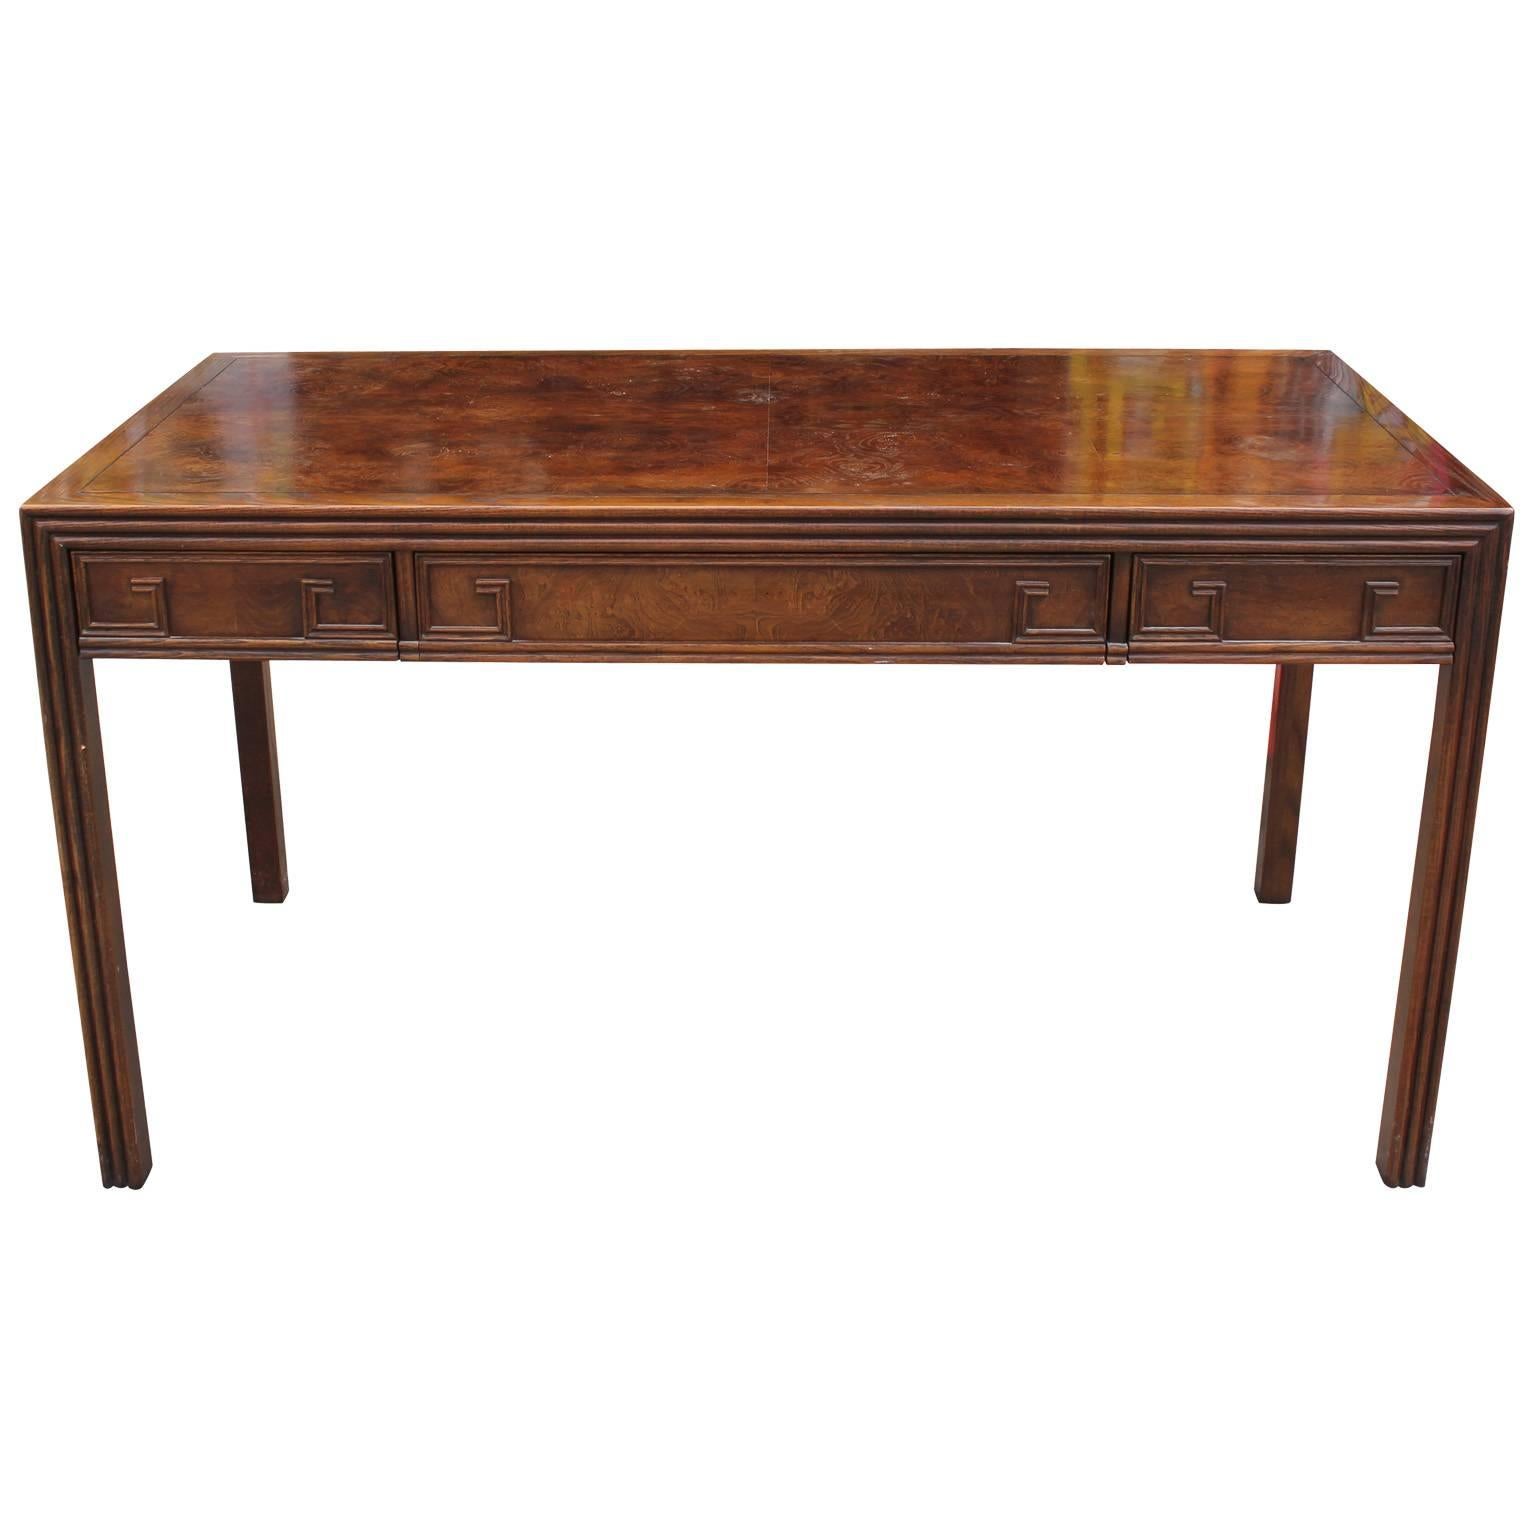 Wonderful clean lined desk. Desk has a dramatic burl wood top. A carved Greek key motif adorns all four sides of desk. Three drawers provide storage. Excellent attention to detail makes this the perfect transitional piece. Made by Baker Furniture